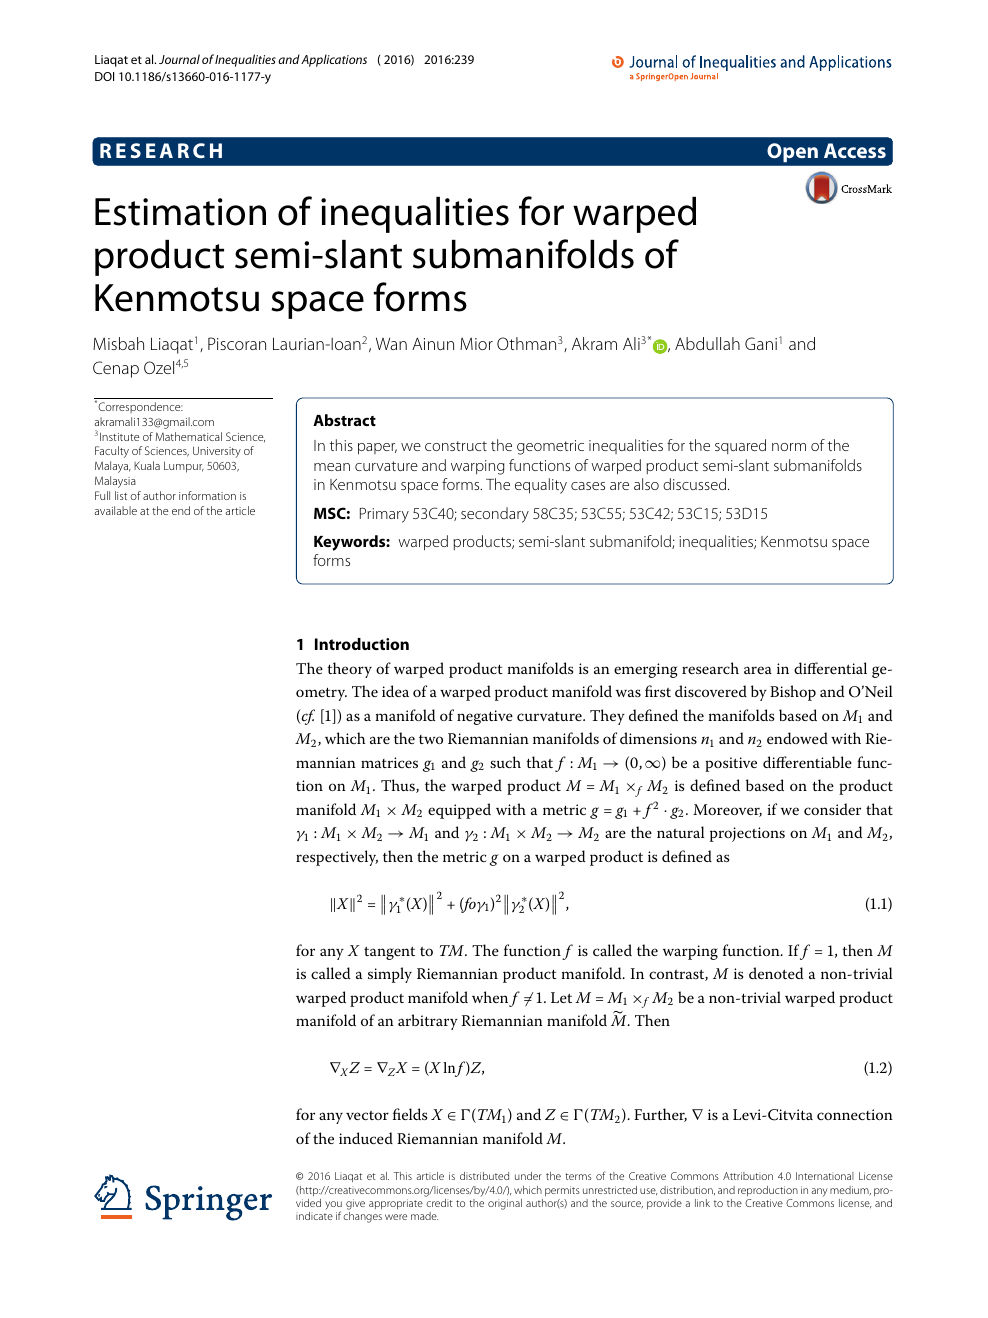 Estimation Of Inequalities For Warped Product Semi Slant Submanifolds Of Kenmotsu Space Forms Topic Of Research Paper In Mathematics Download Scholarly Article Pdf And Read For Free On Cyberleninka Open Science Hub